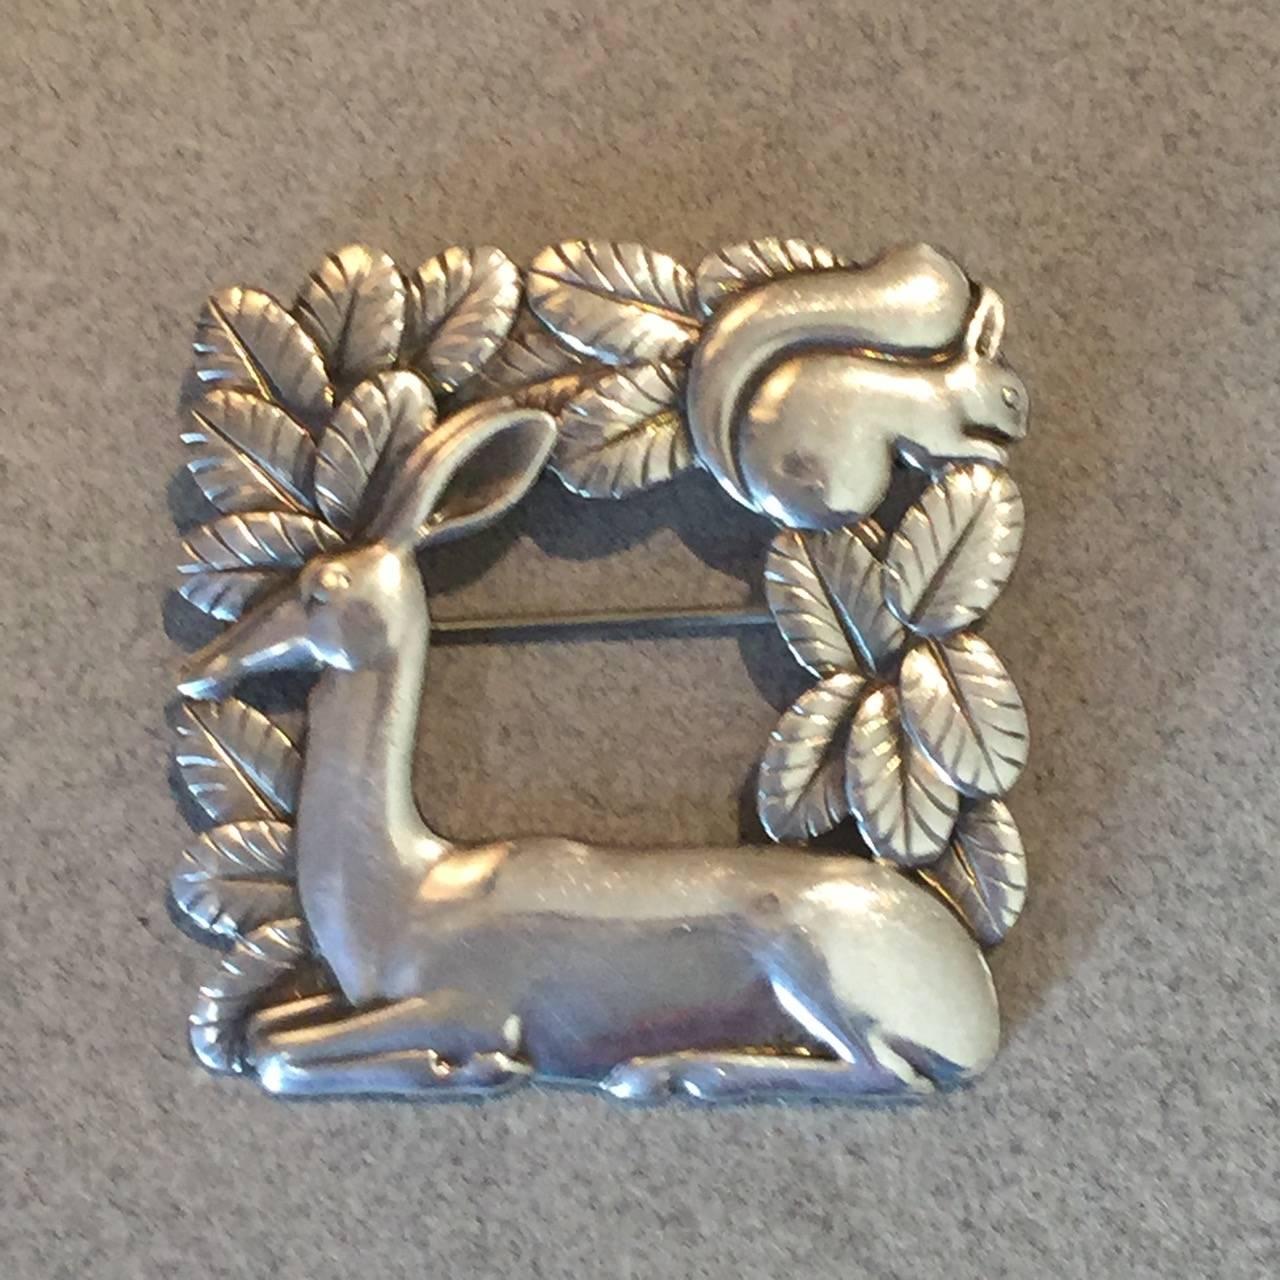 Intricately detailed, open-squared brooch featuring a deer resting before a squirrel in foliage. Very well made with gorgeous patina.